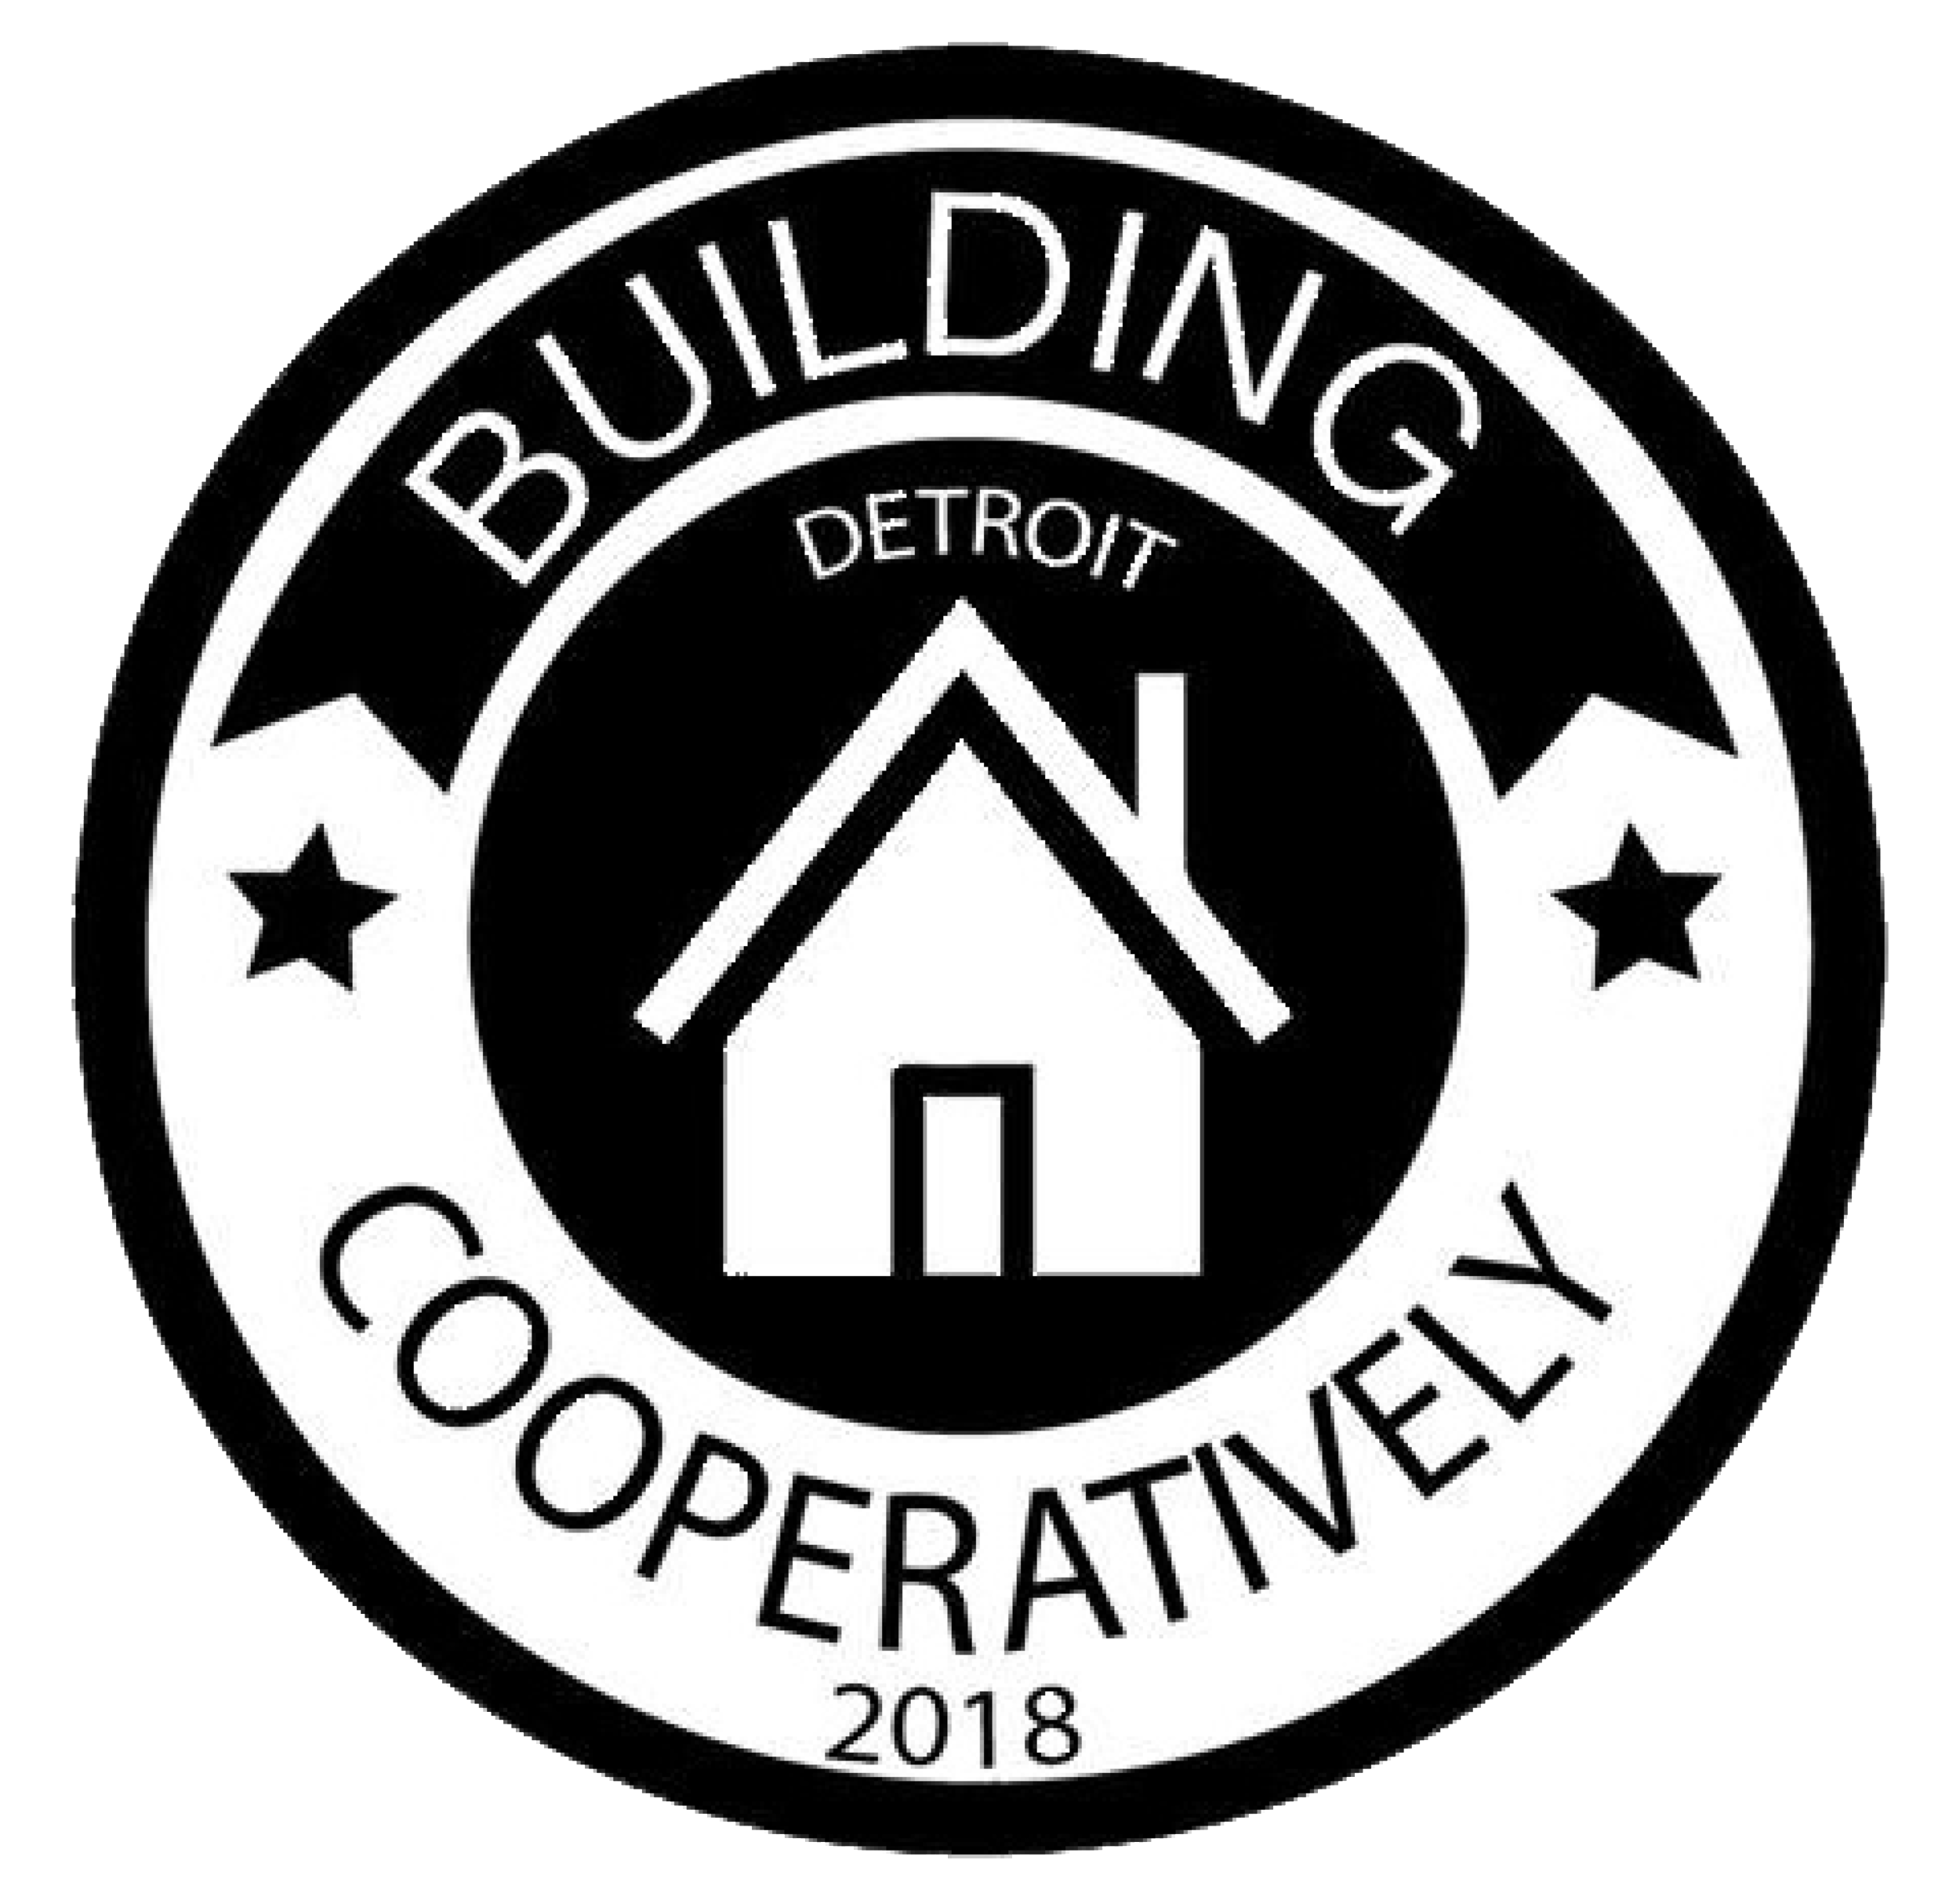 Building Cooperatively